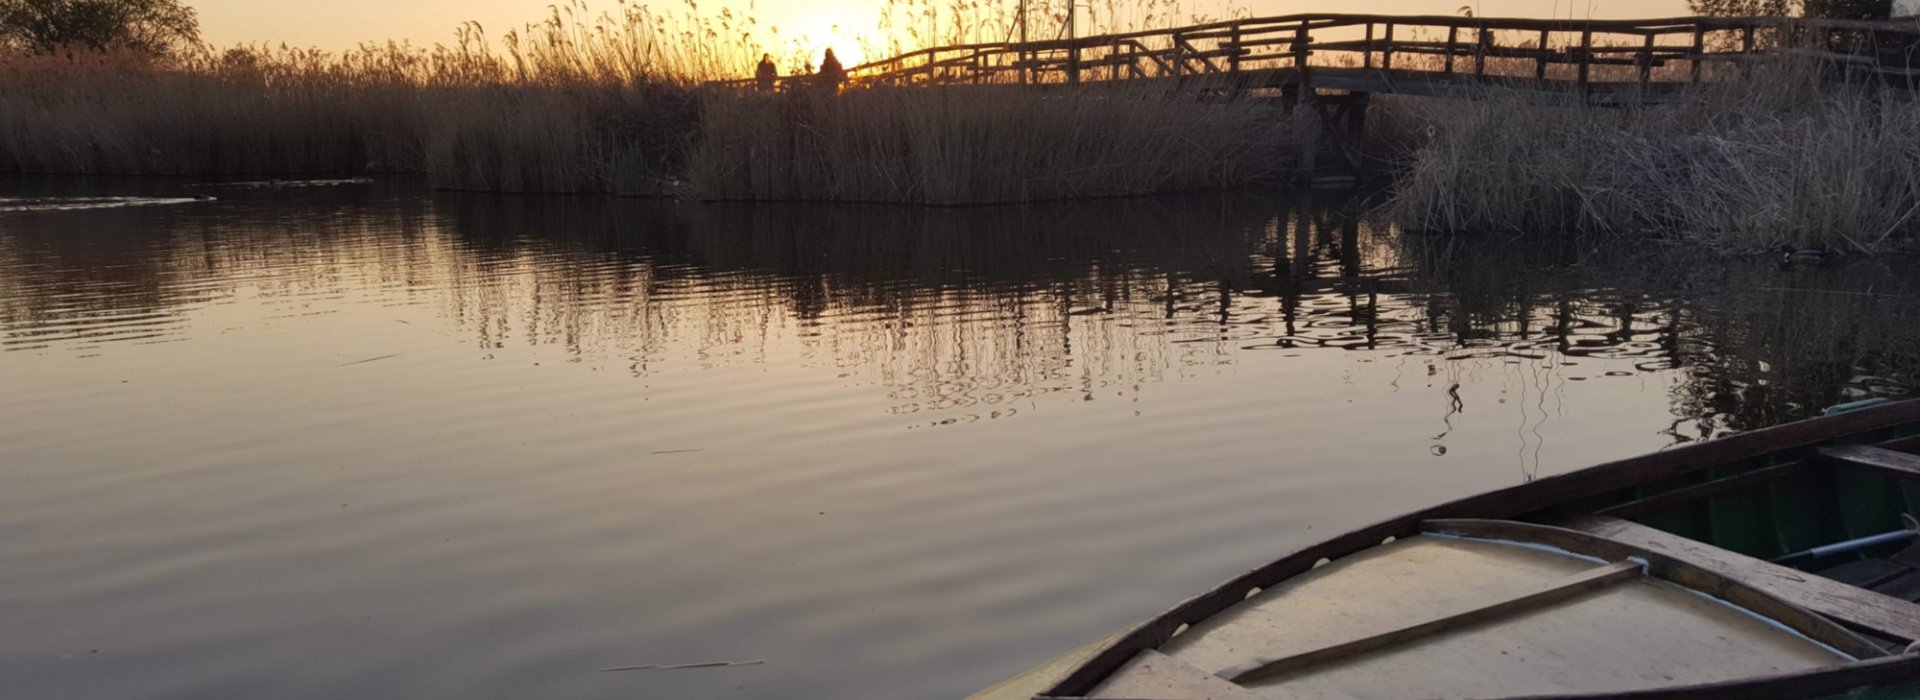 typical wooden boat in the massaciuccoli lake during sunset